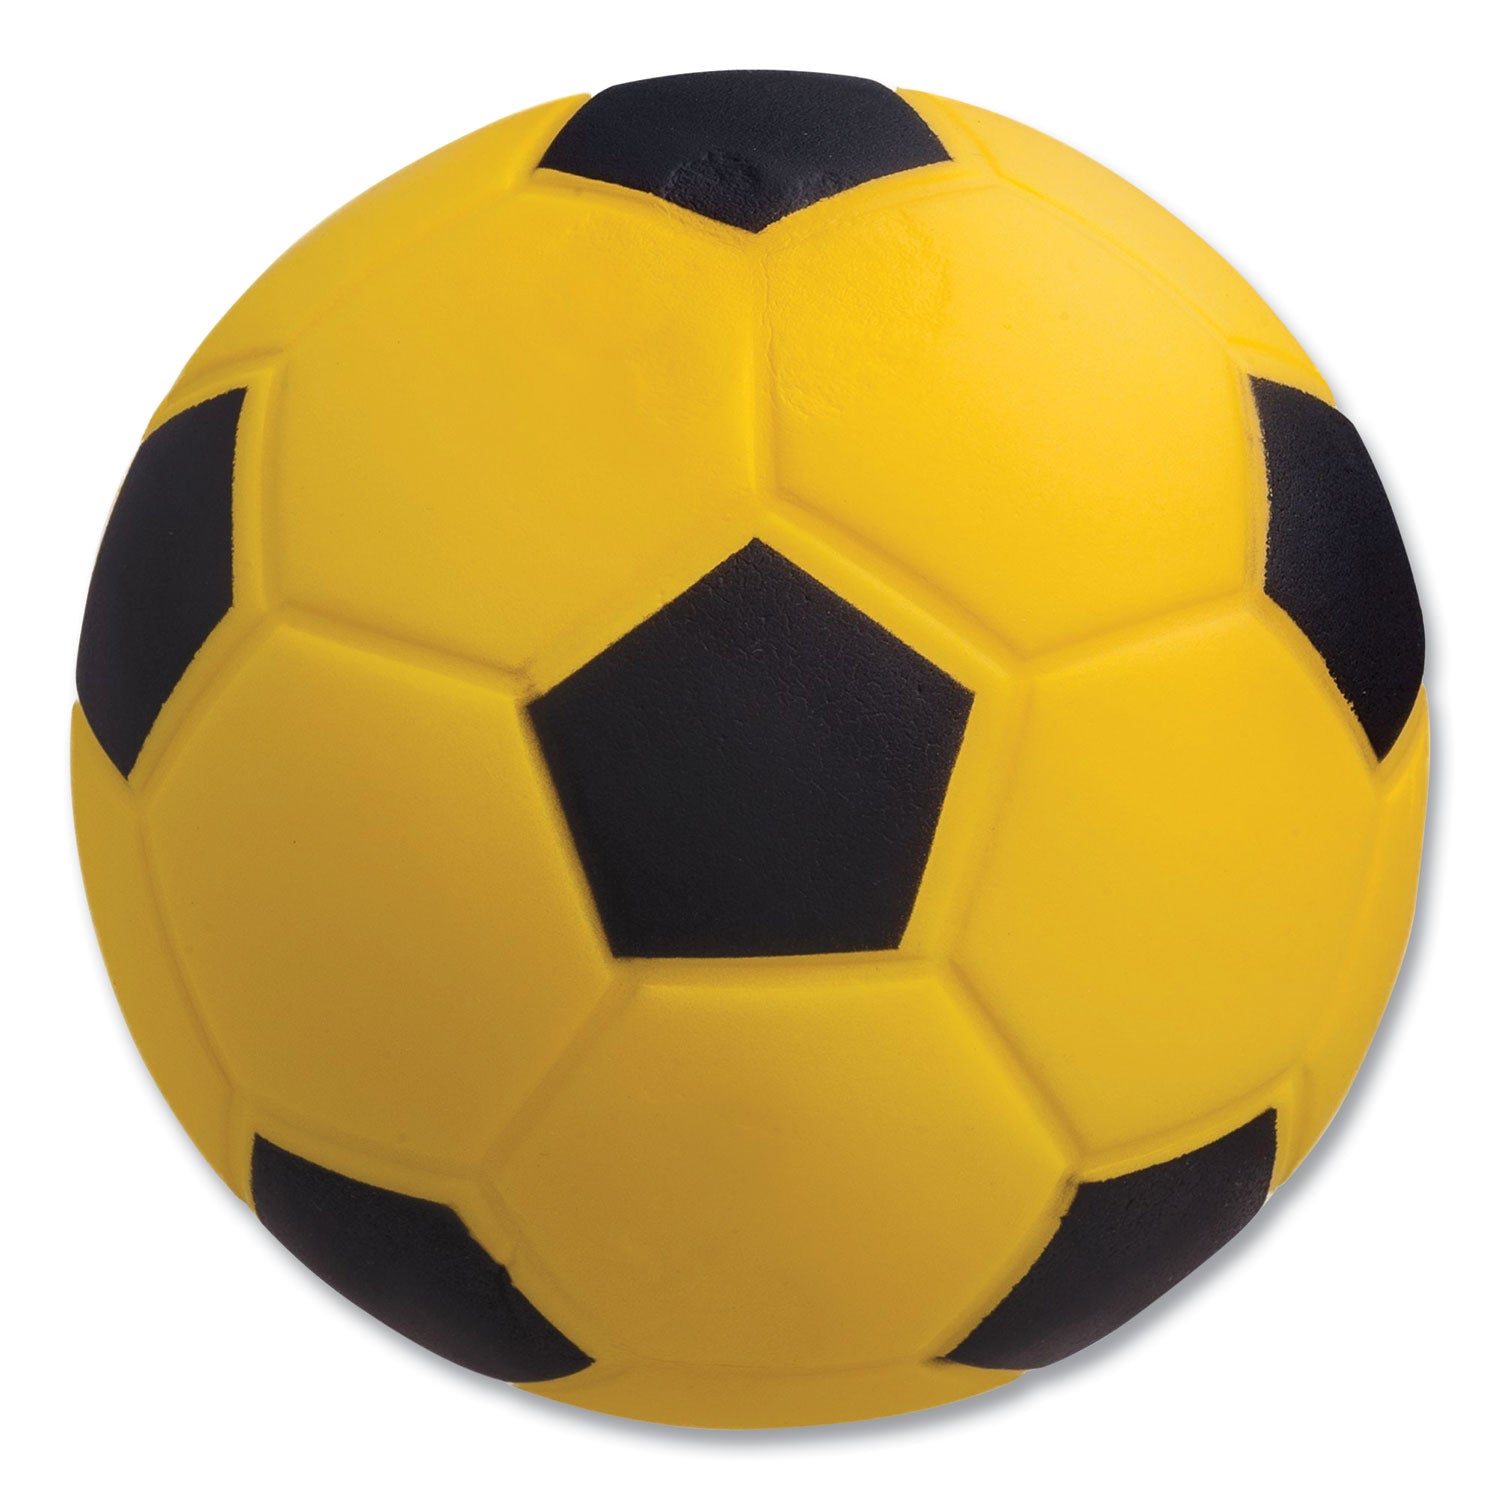 Coated Foam Sport Ball, For Soccer, Playground Size, Yellow - 